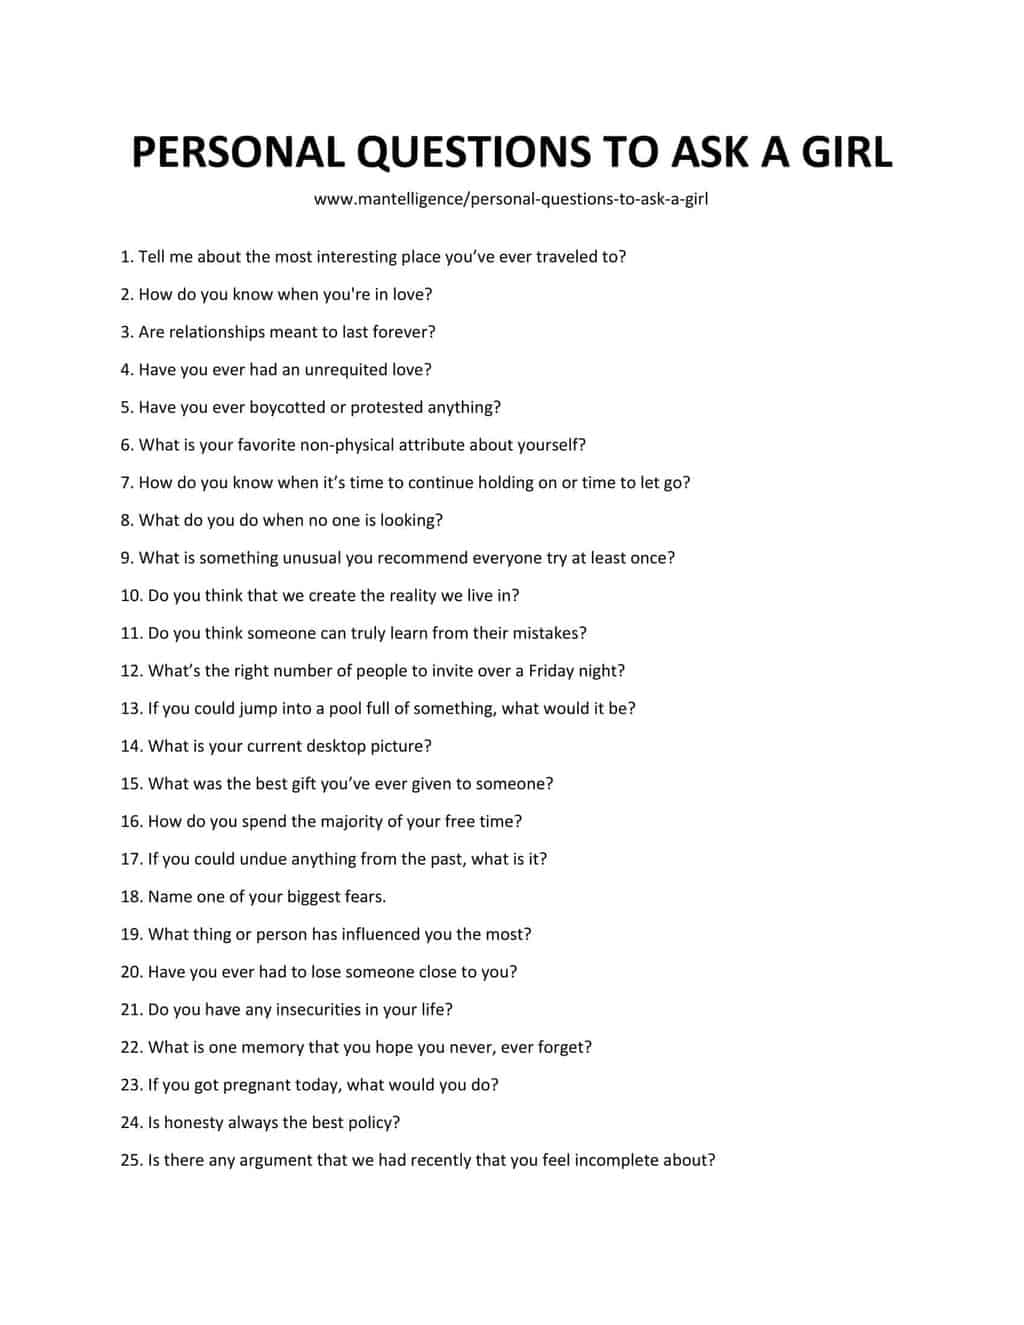 A top ask questions woman to 21 Questions